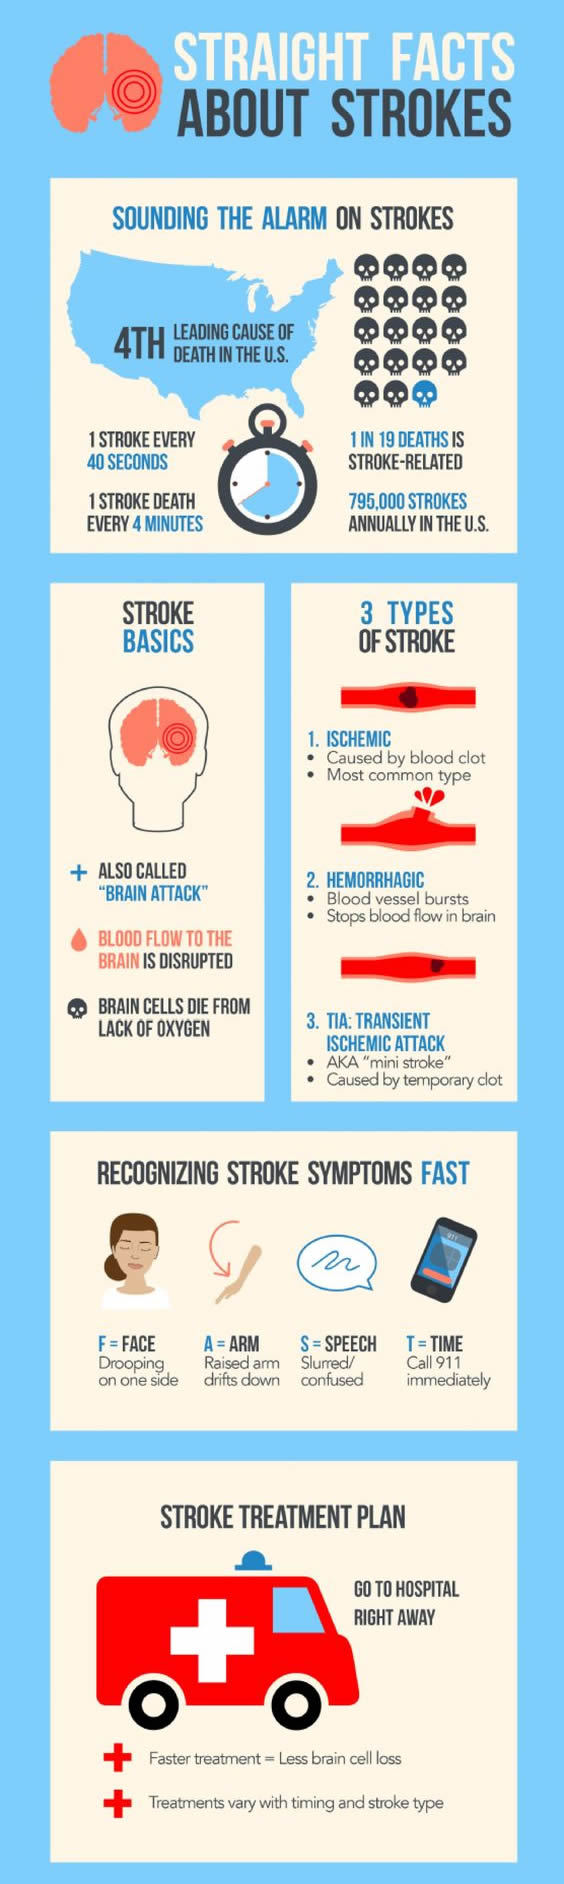 Facts about stroke